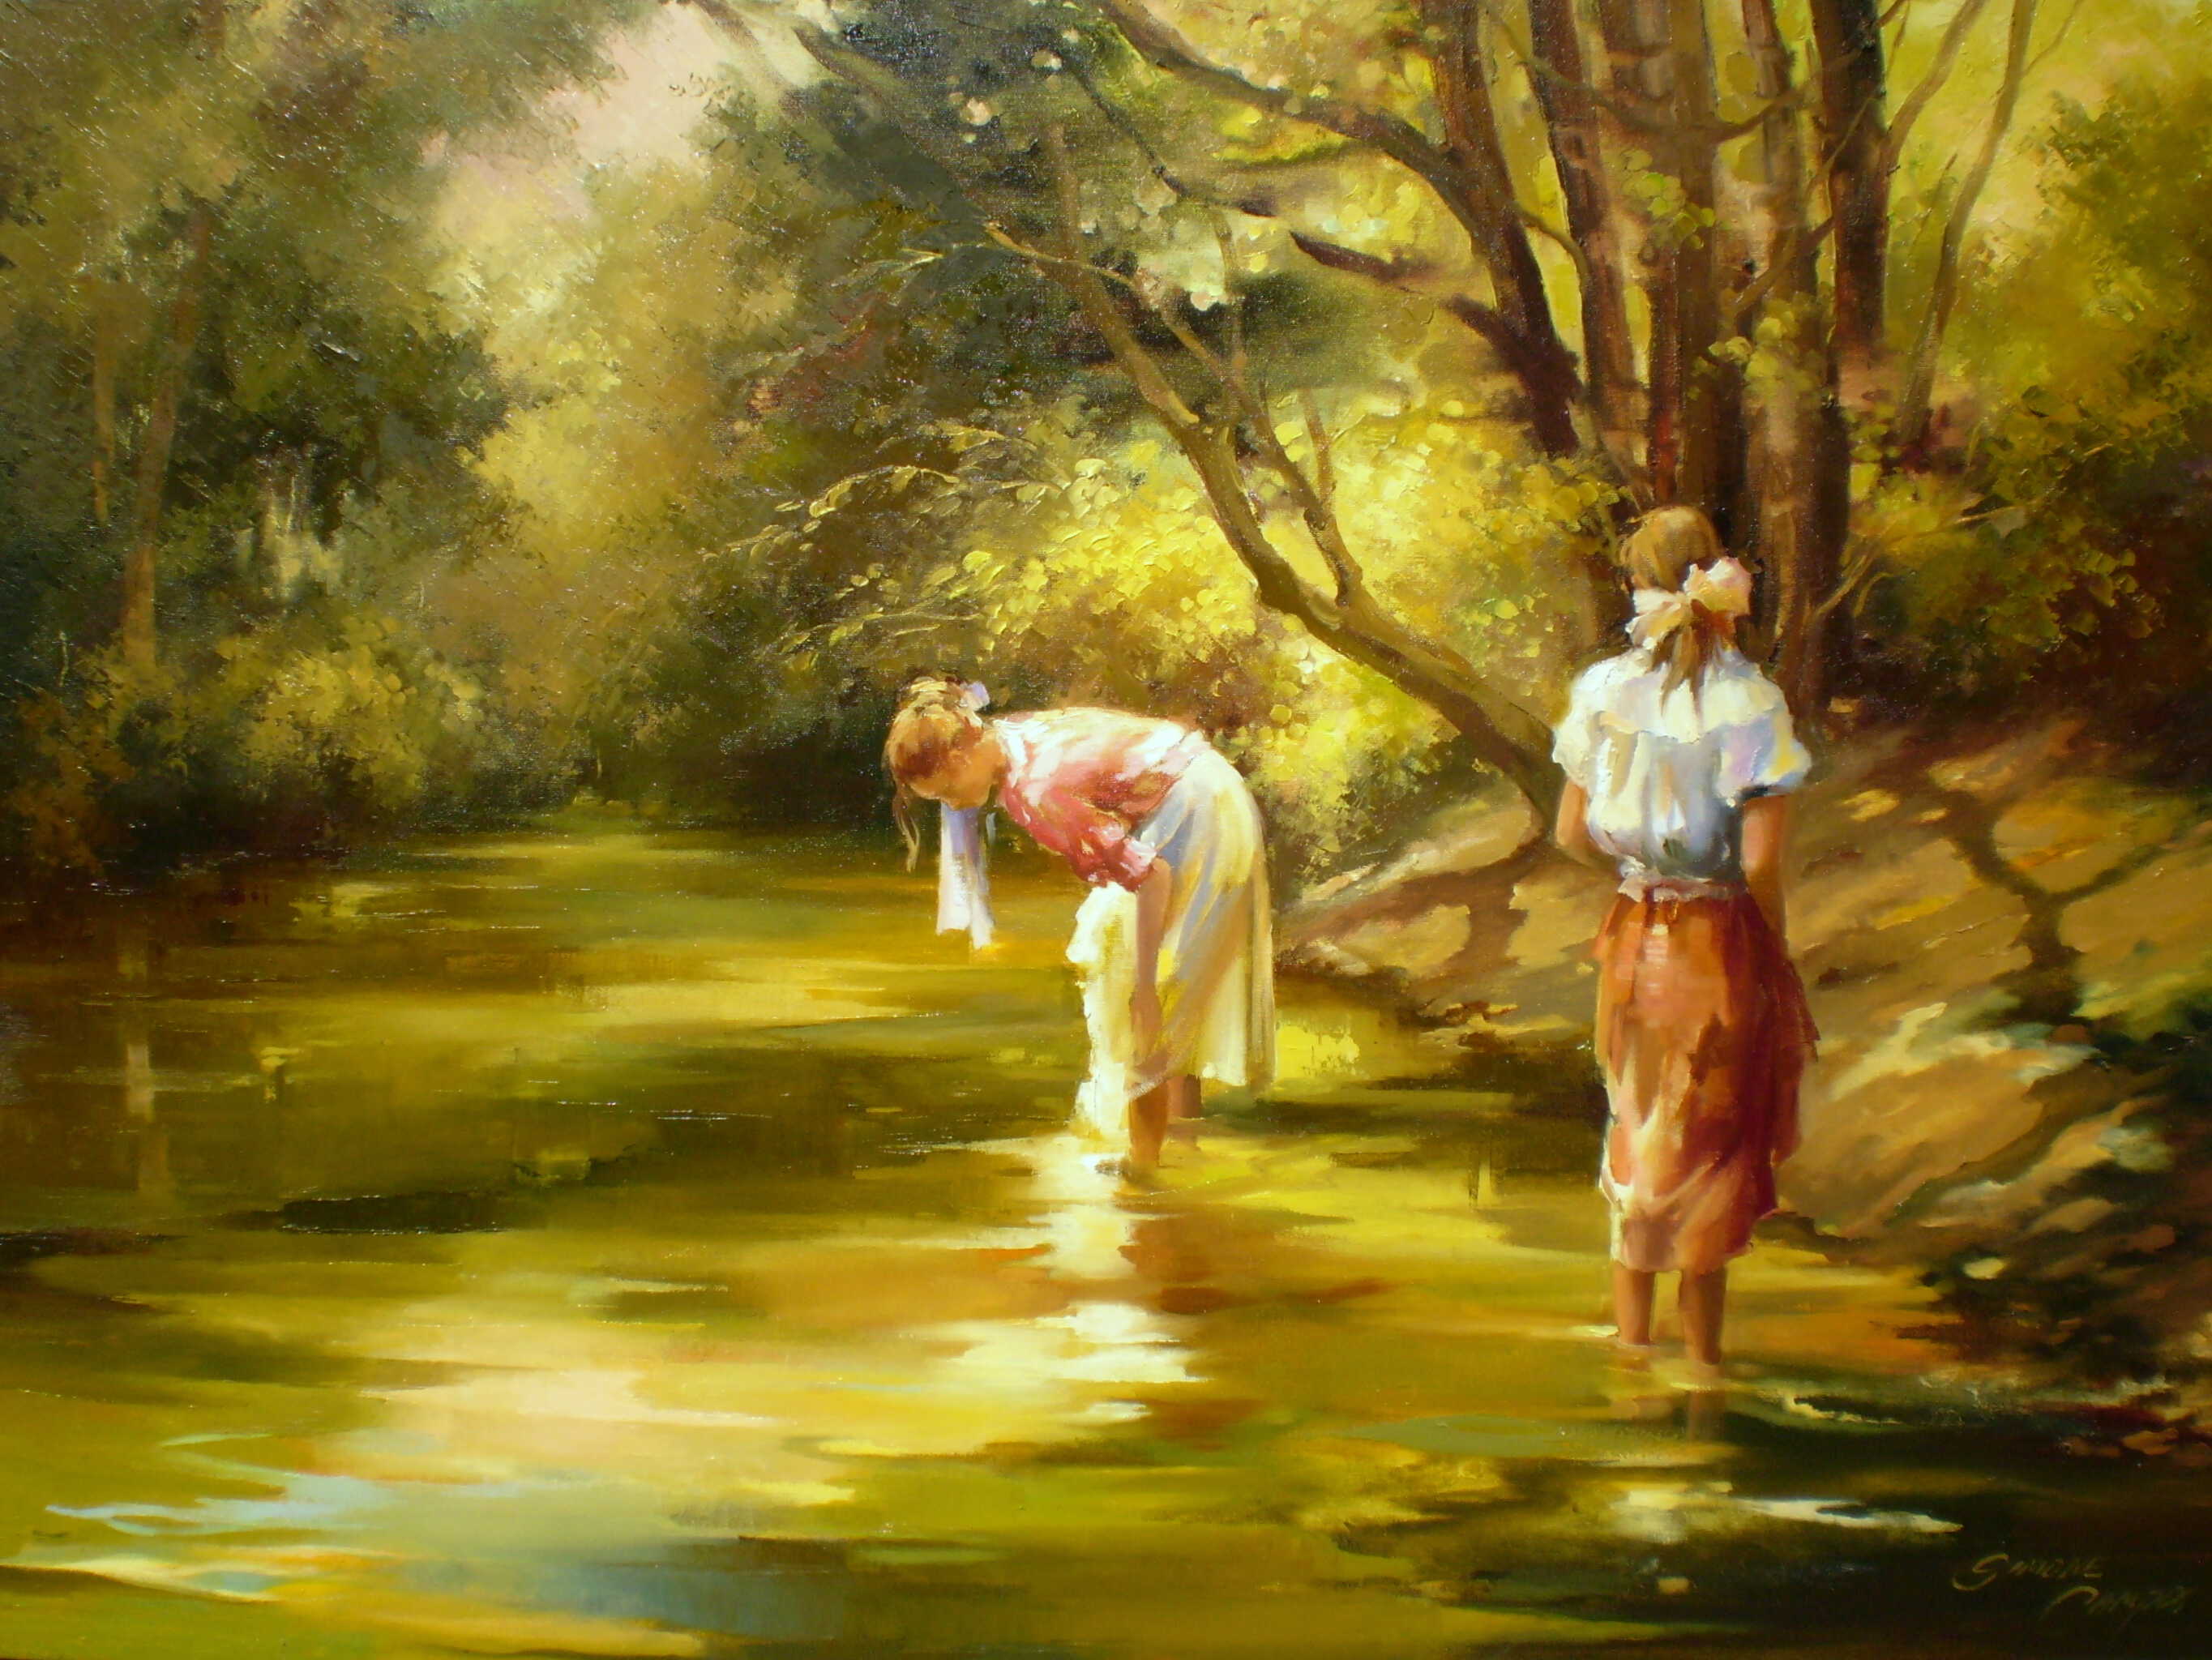 Girls at the river's edge